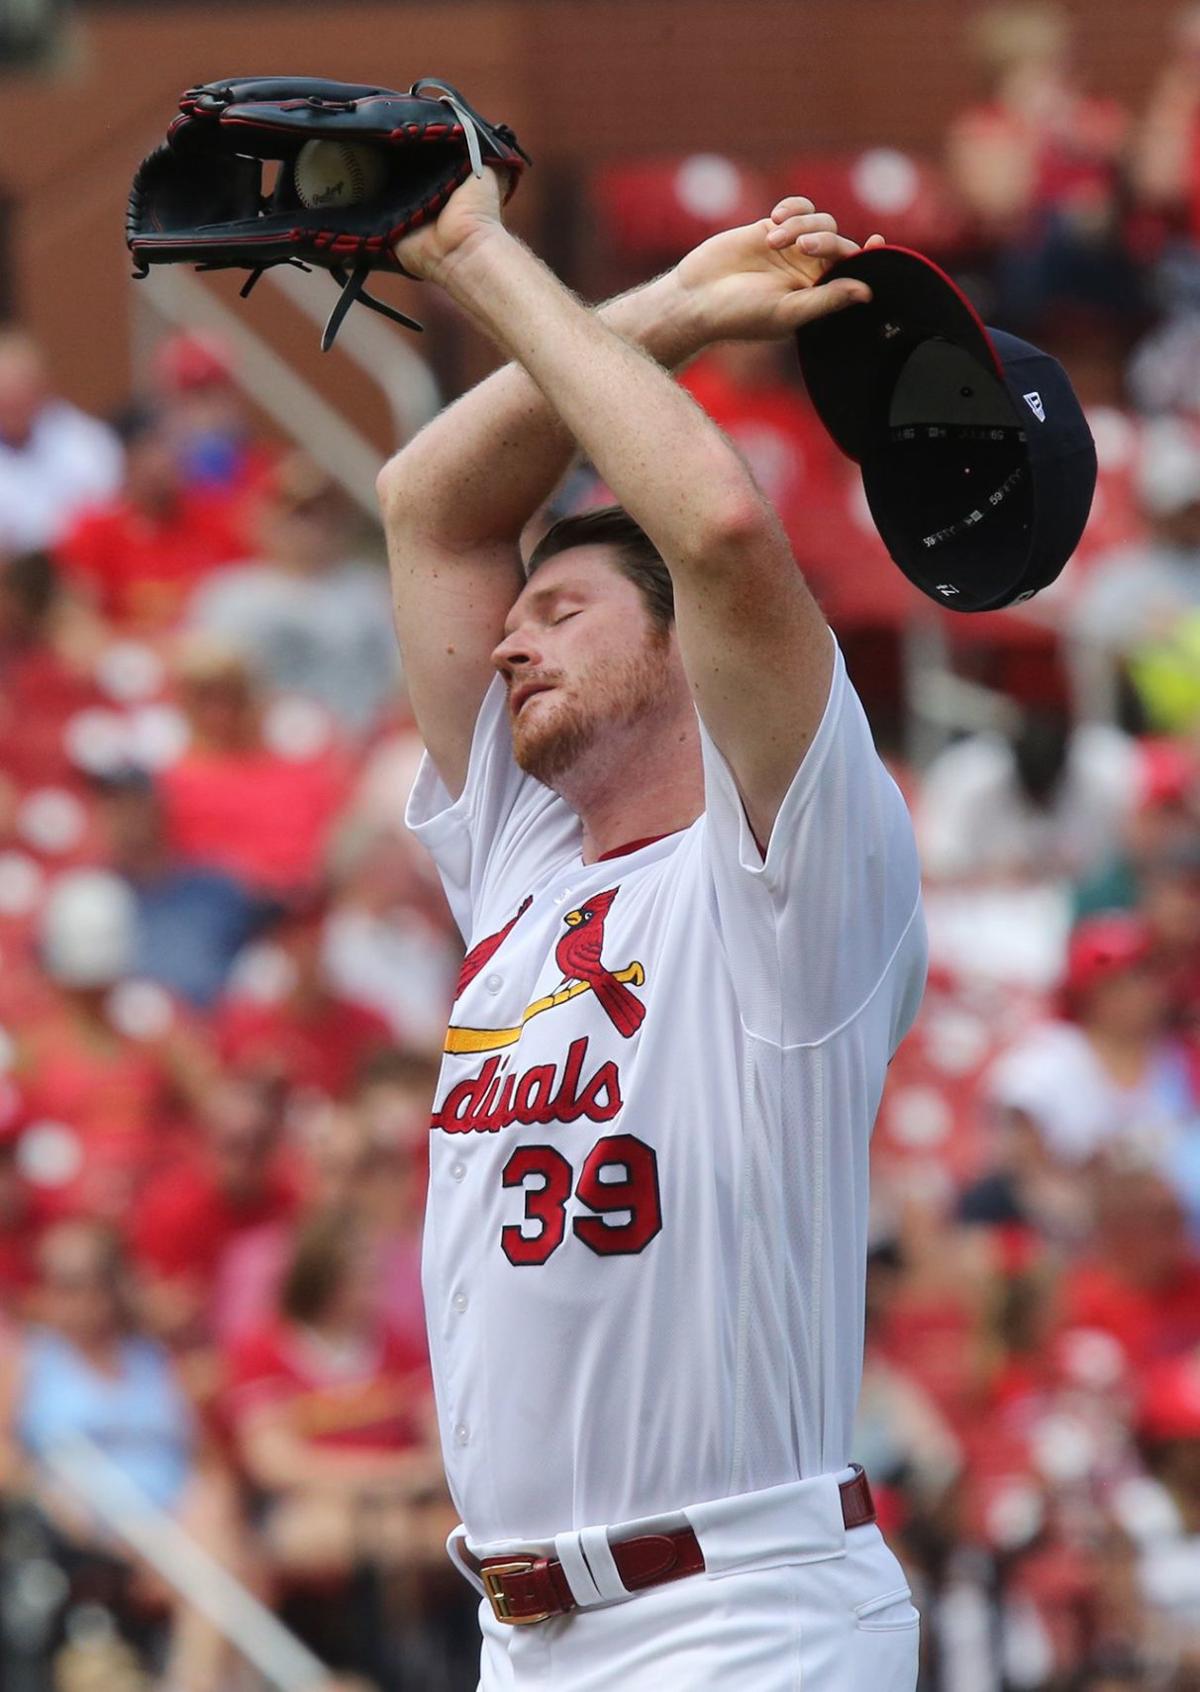 New Cardinals manager Shildt gets first win — and a dousing | St. Louis Cardinals | www.semadata.org